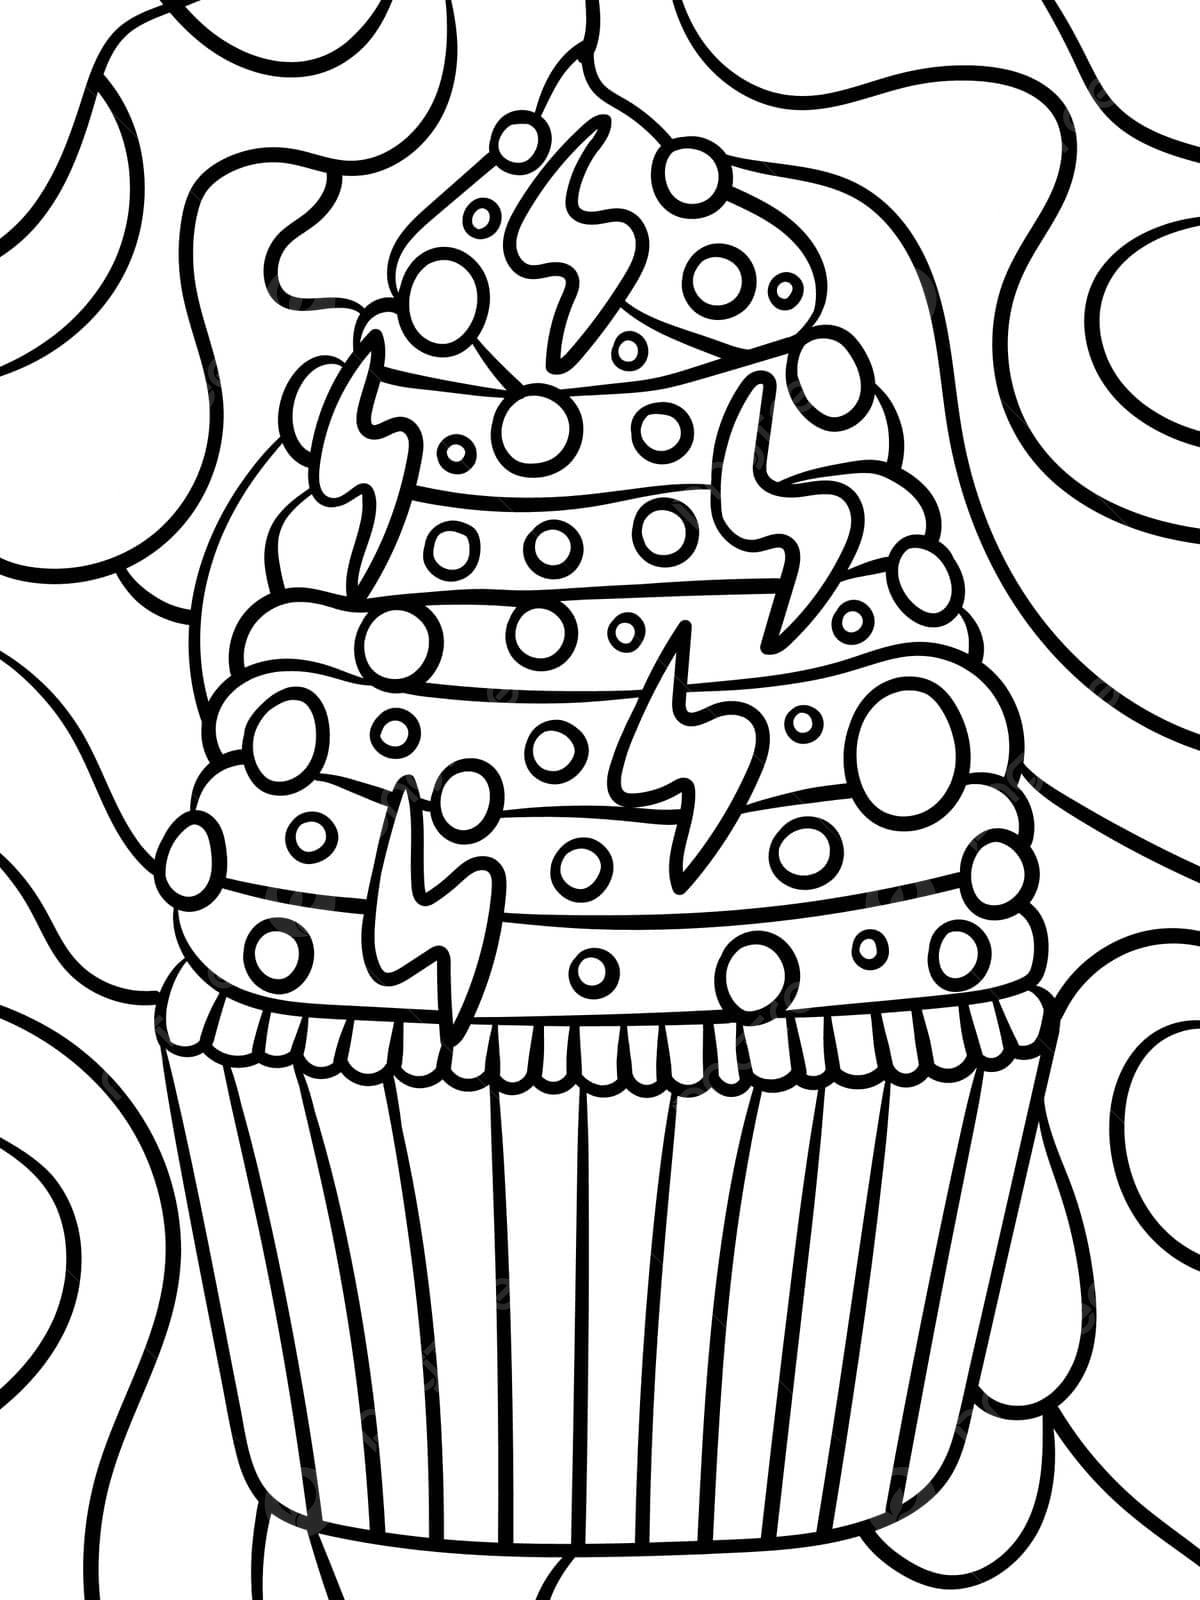 Muffin sweet food coloring page for kids silhouette dessert coloring page vector silhouette dessert coloring page png and vector with transparent background for free download